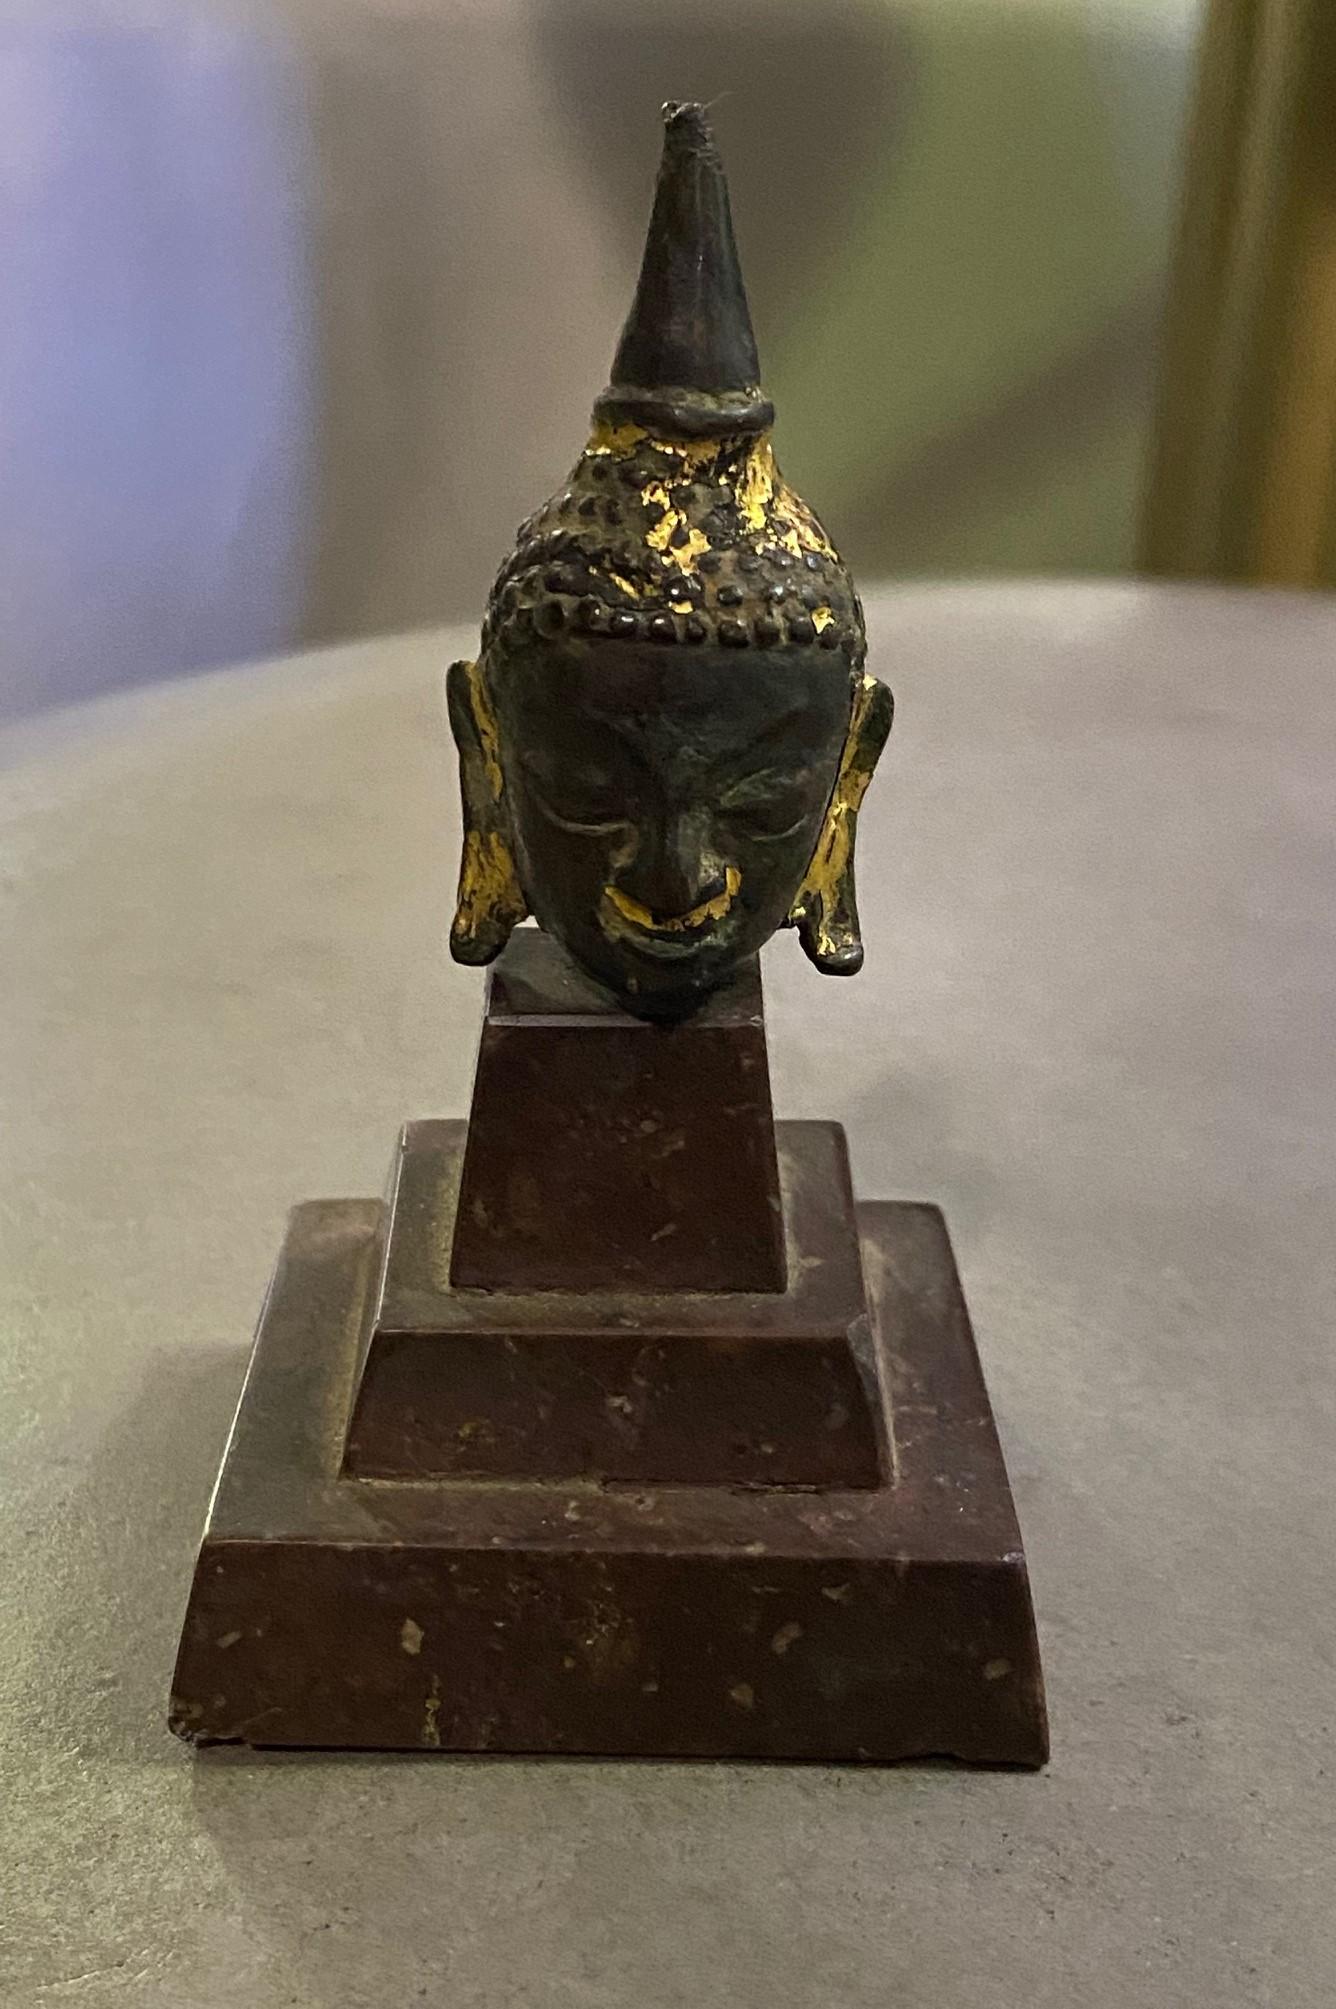 A wonderful, little gem of a piece. Thai/ Siam meditating Buddha with serenely closed eyes in the Kamphaeng Phet style. The piece has a beautiful patina acquired over time. 

From a collection of Asian antiques. Would be a nice addition to any